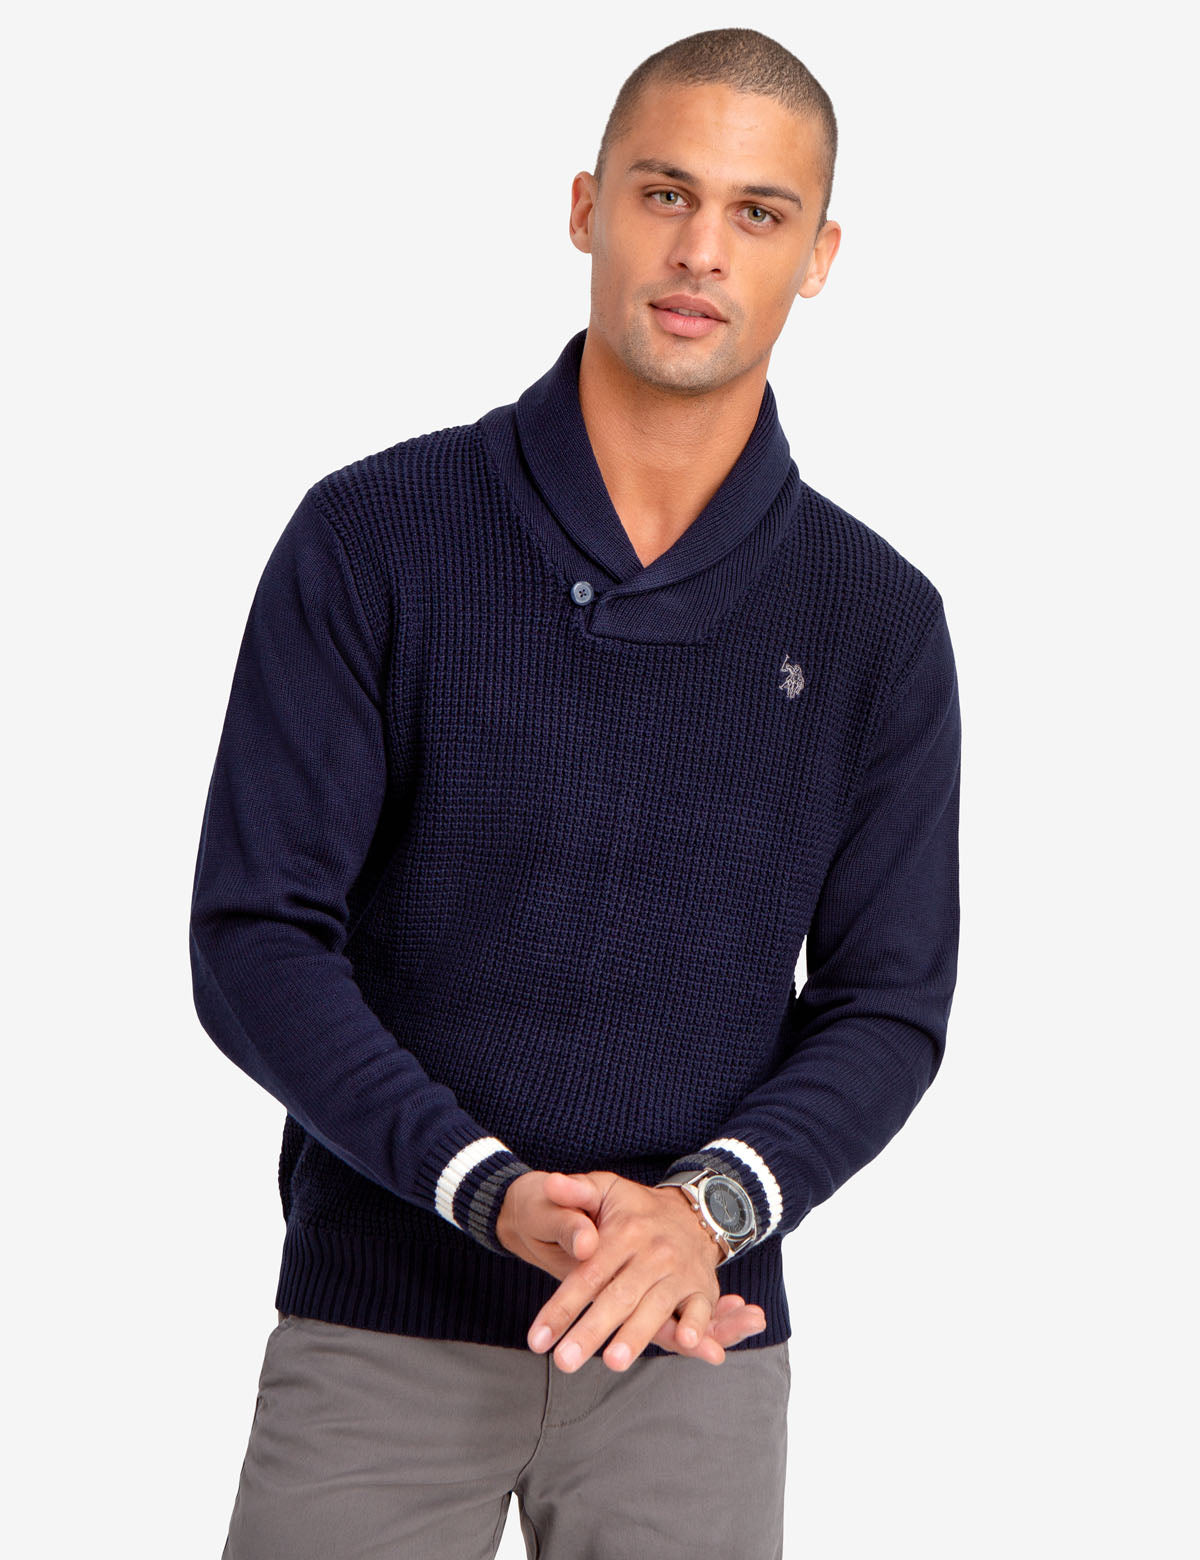 polo sweater with collar